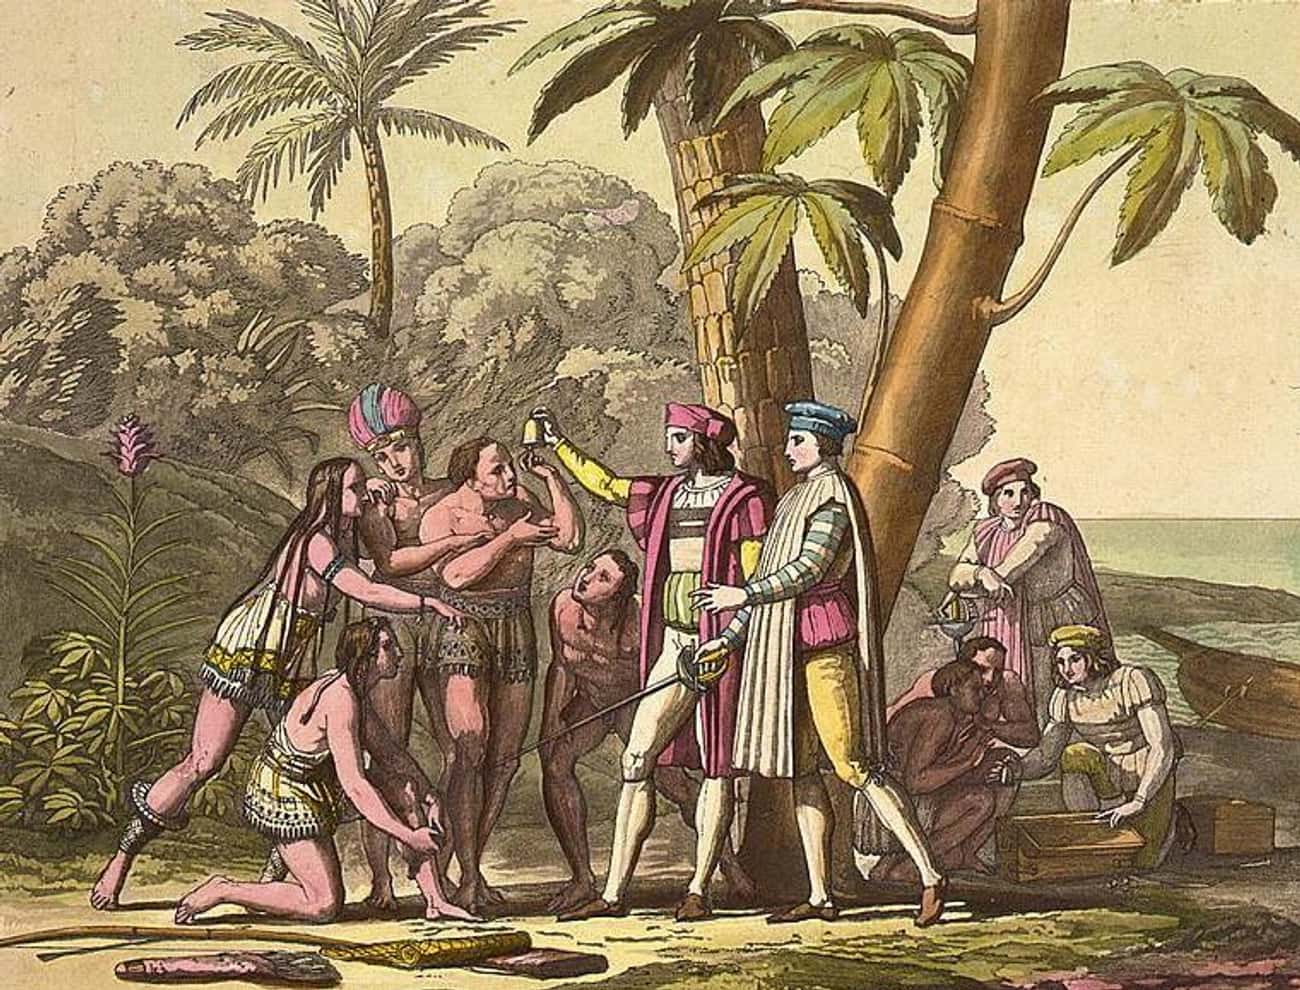 Christopher Columbus Possibly Brought Syphilis Back From The Americas